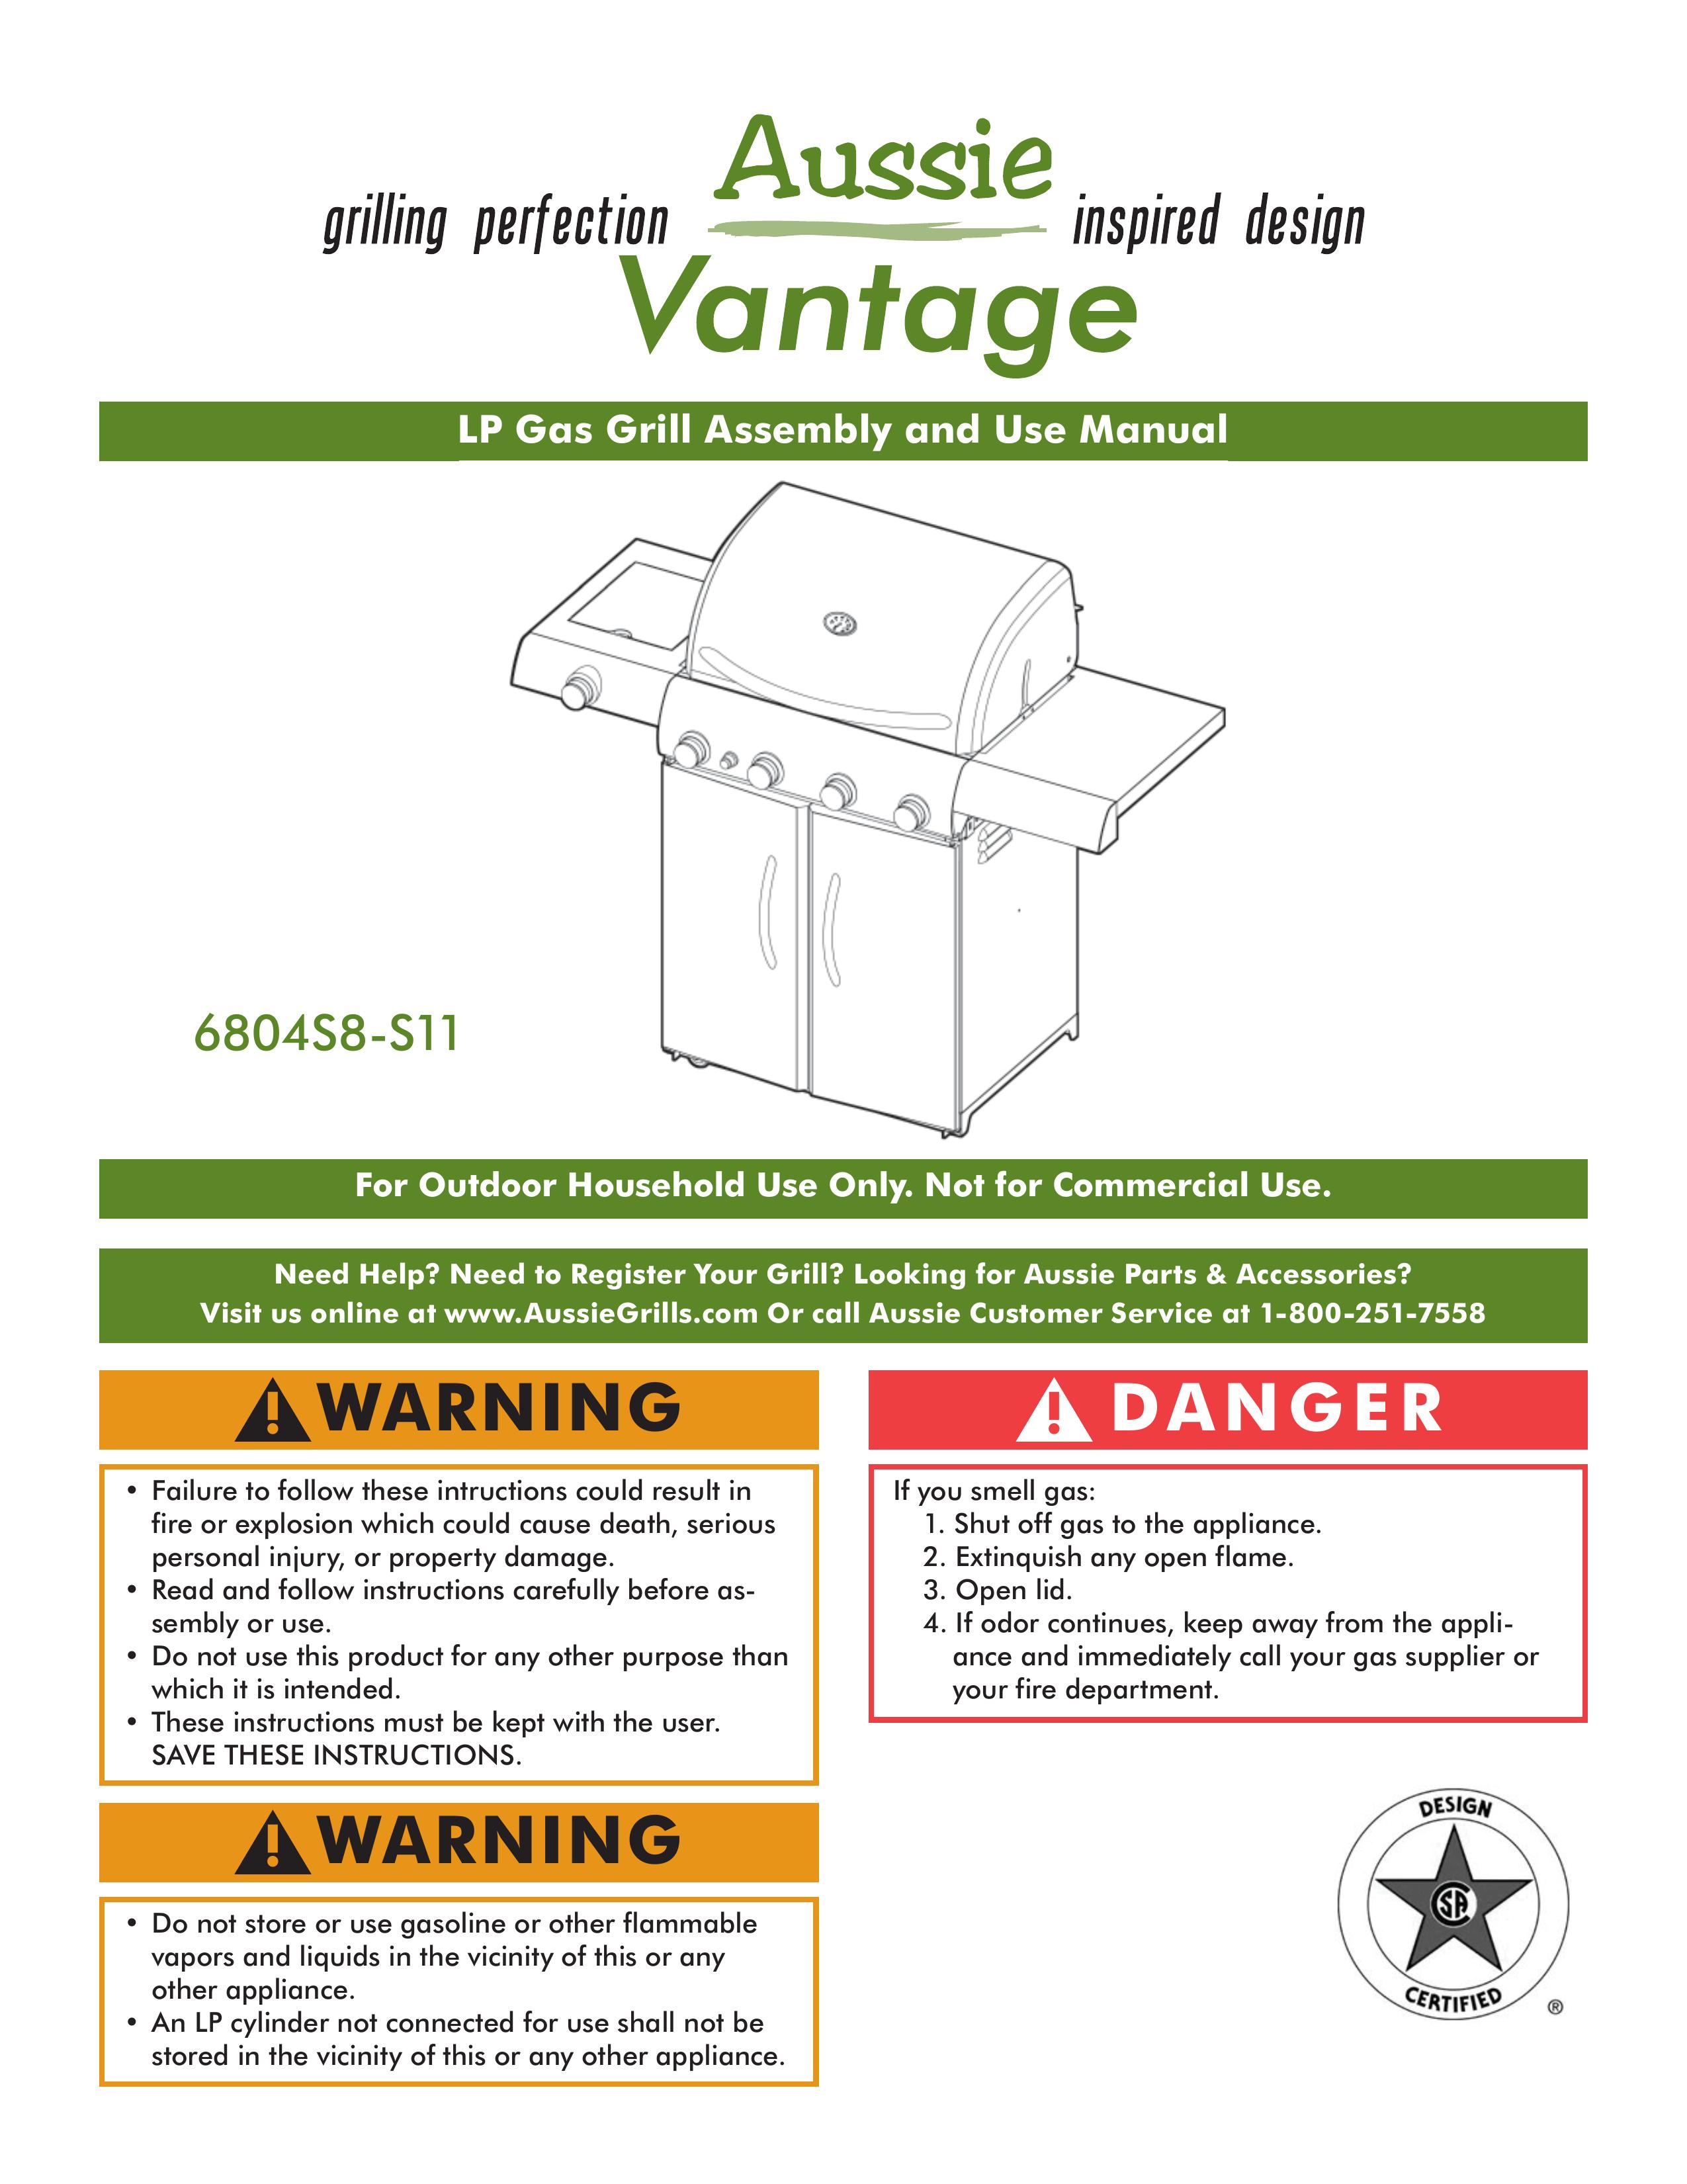 Aussie 6804S8-S11 Gas Grill User Manual